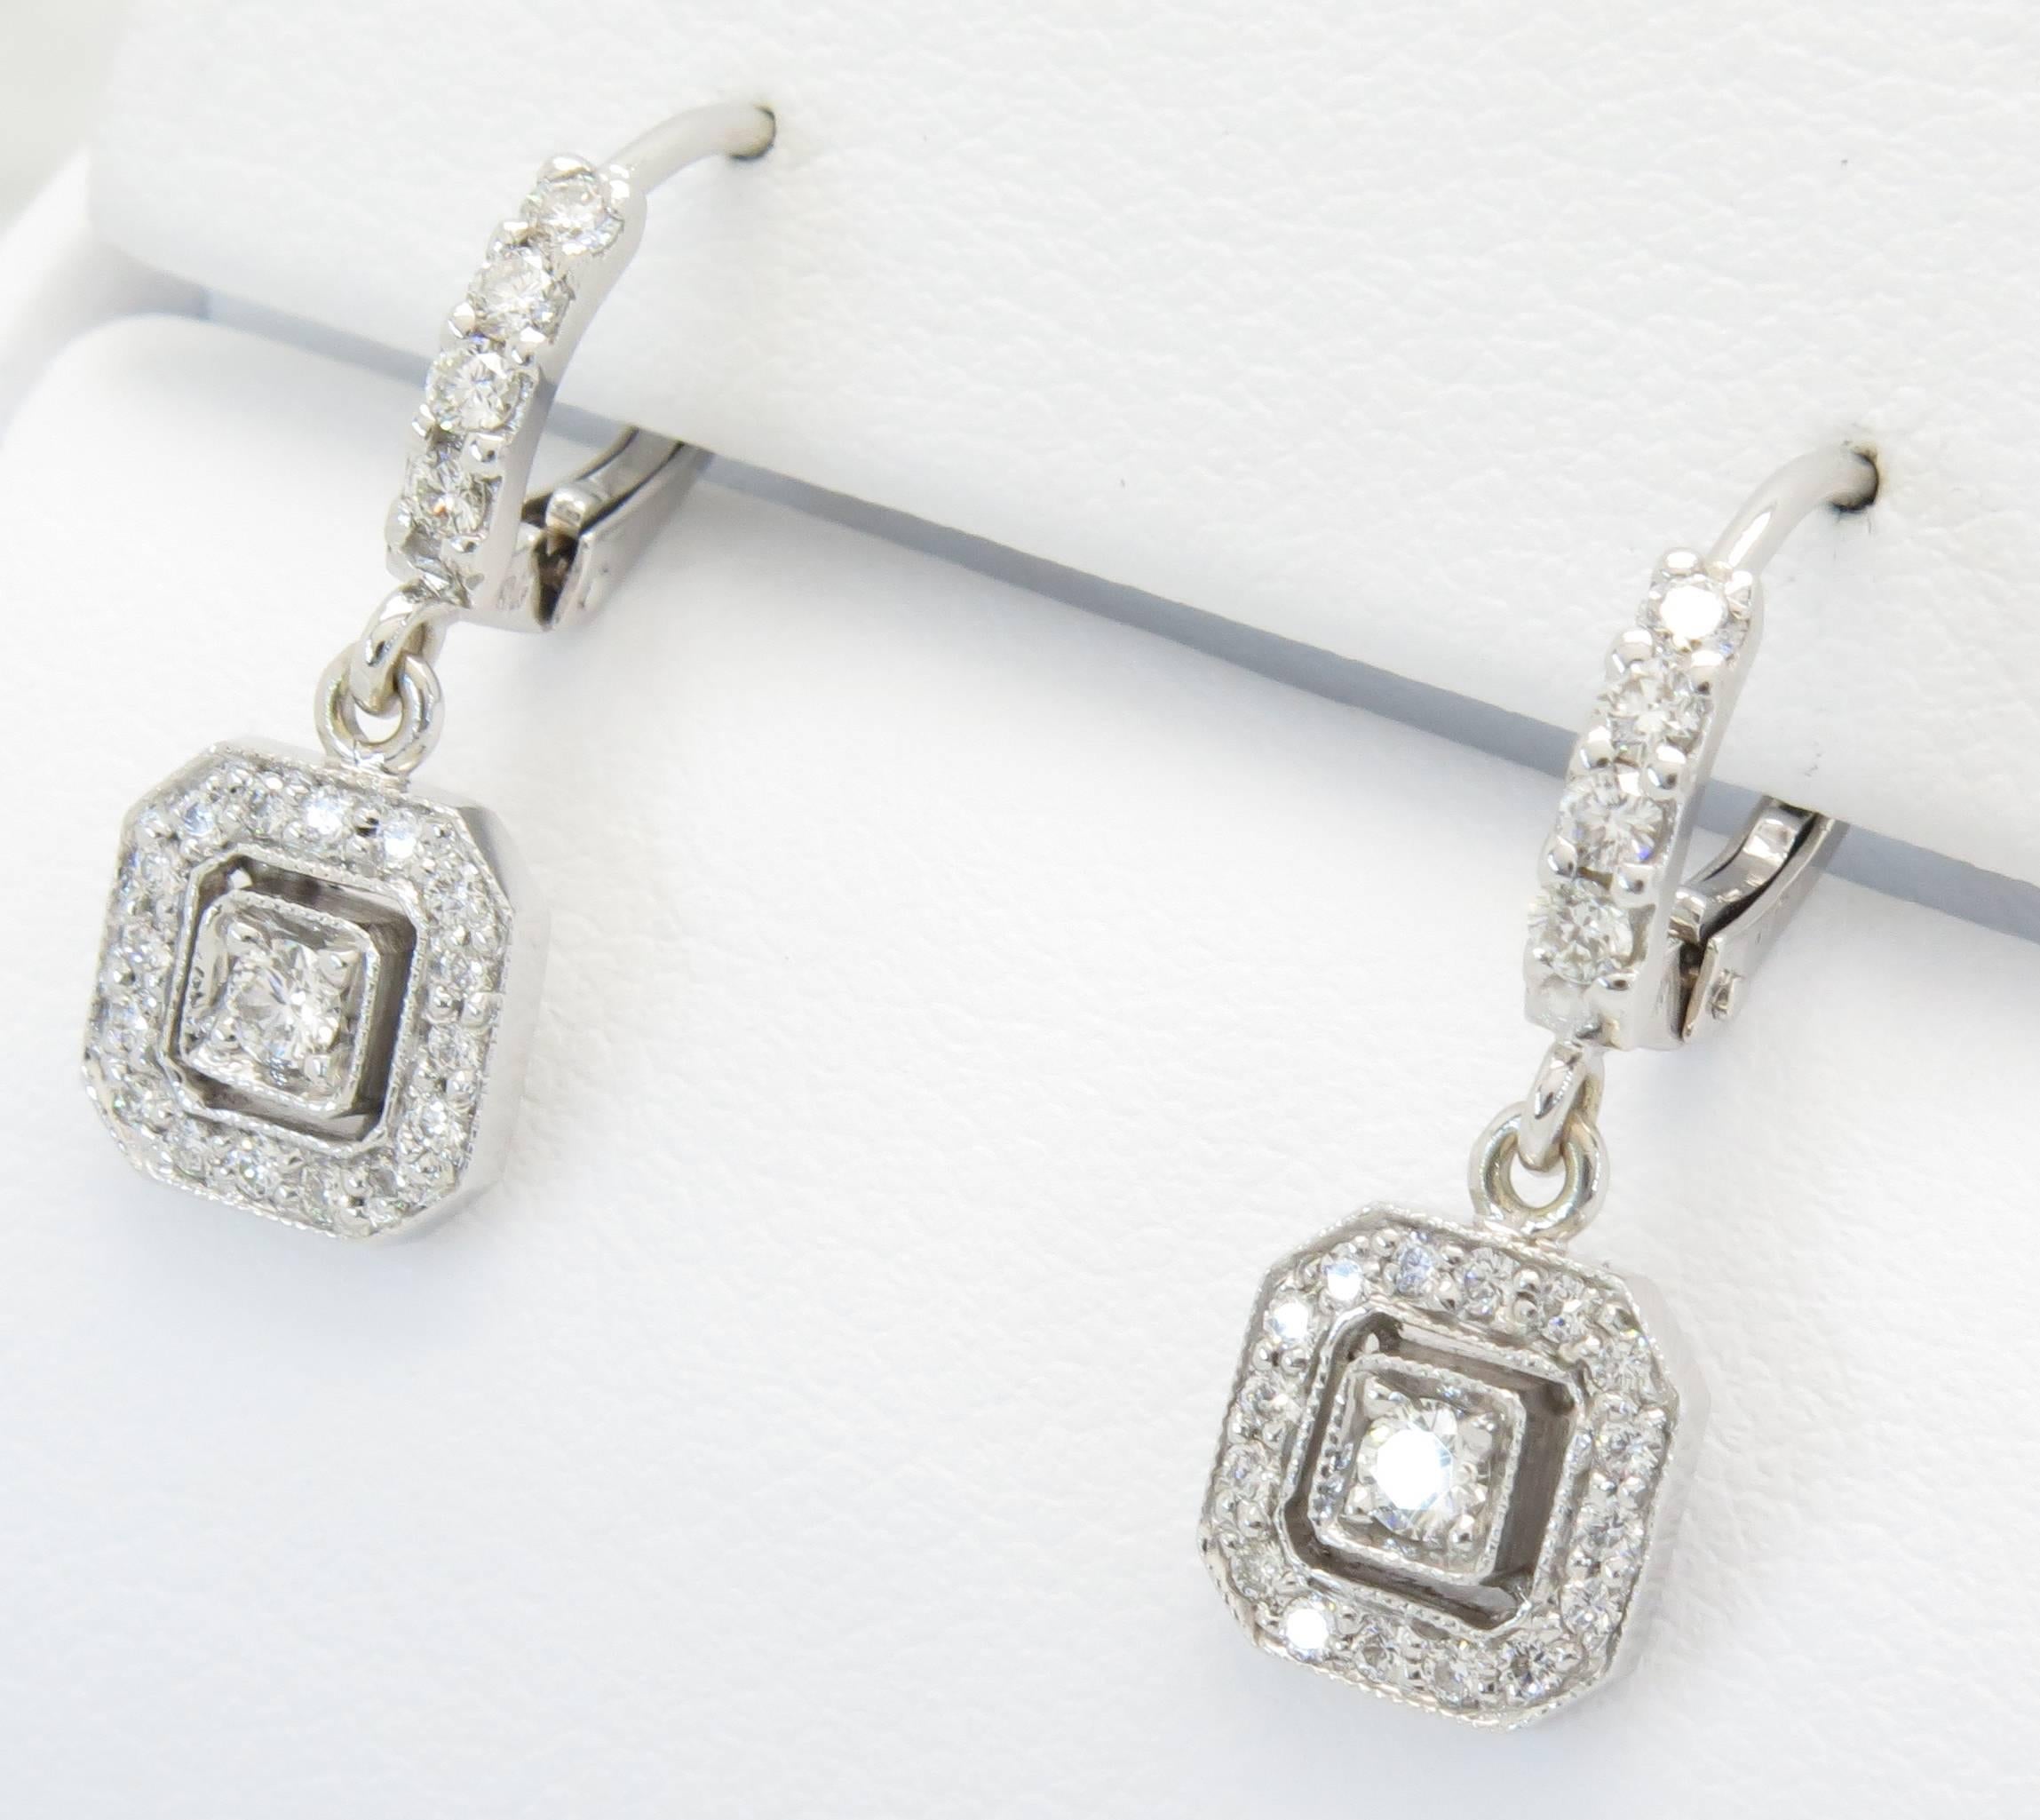 These gorgeous earrings are from the designer Penny Preville. The earrings feature 0.25CTW of round brilliant cut diamonds. The diamonds are set in a octagonal drop, with lever backs. The diamonds are GH/SI1 in quality. The earrings are comprised of